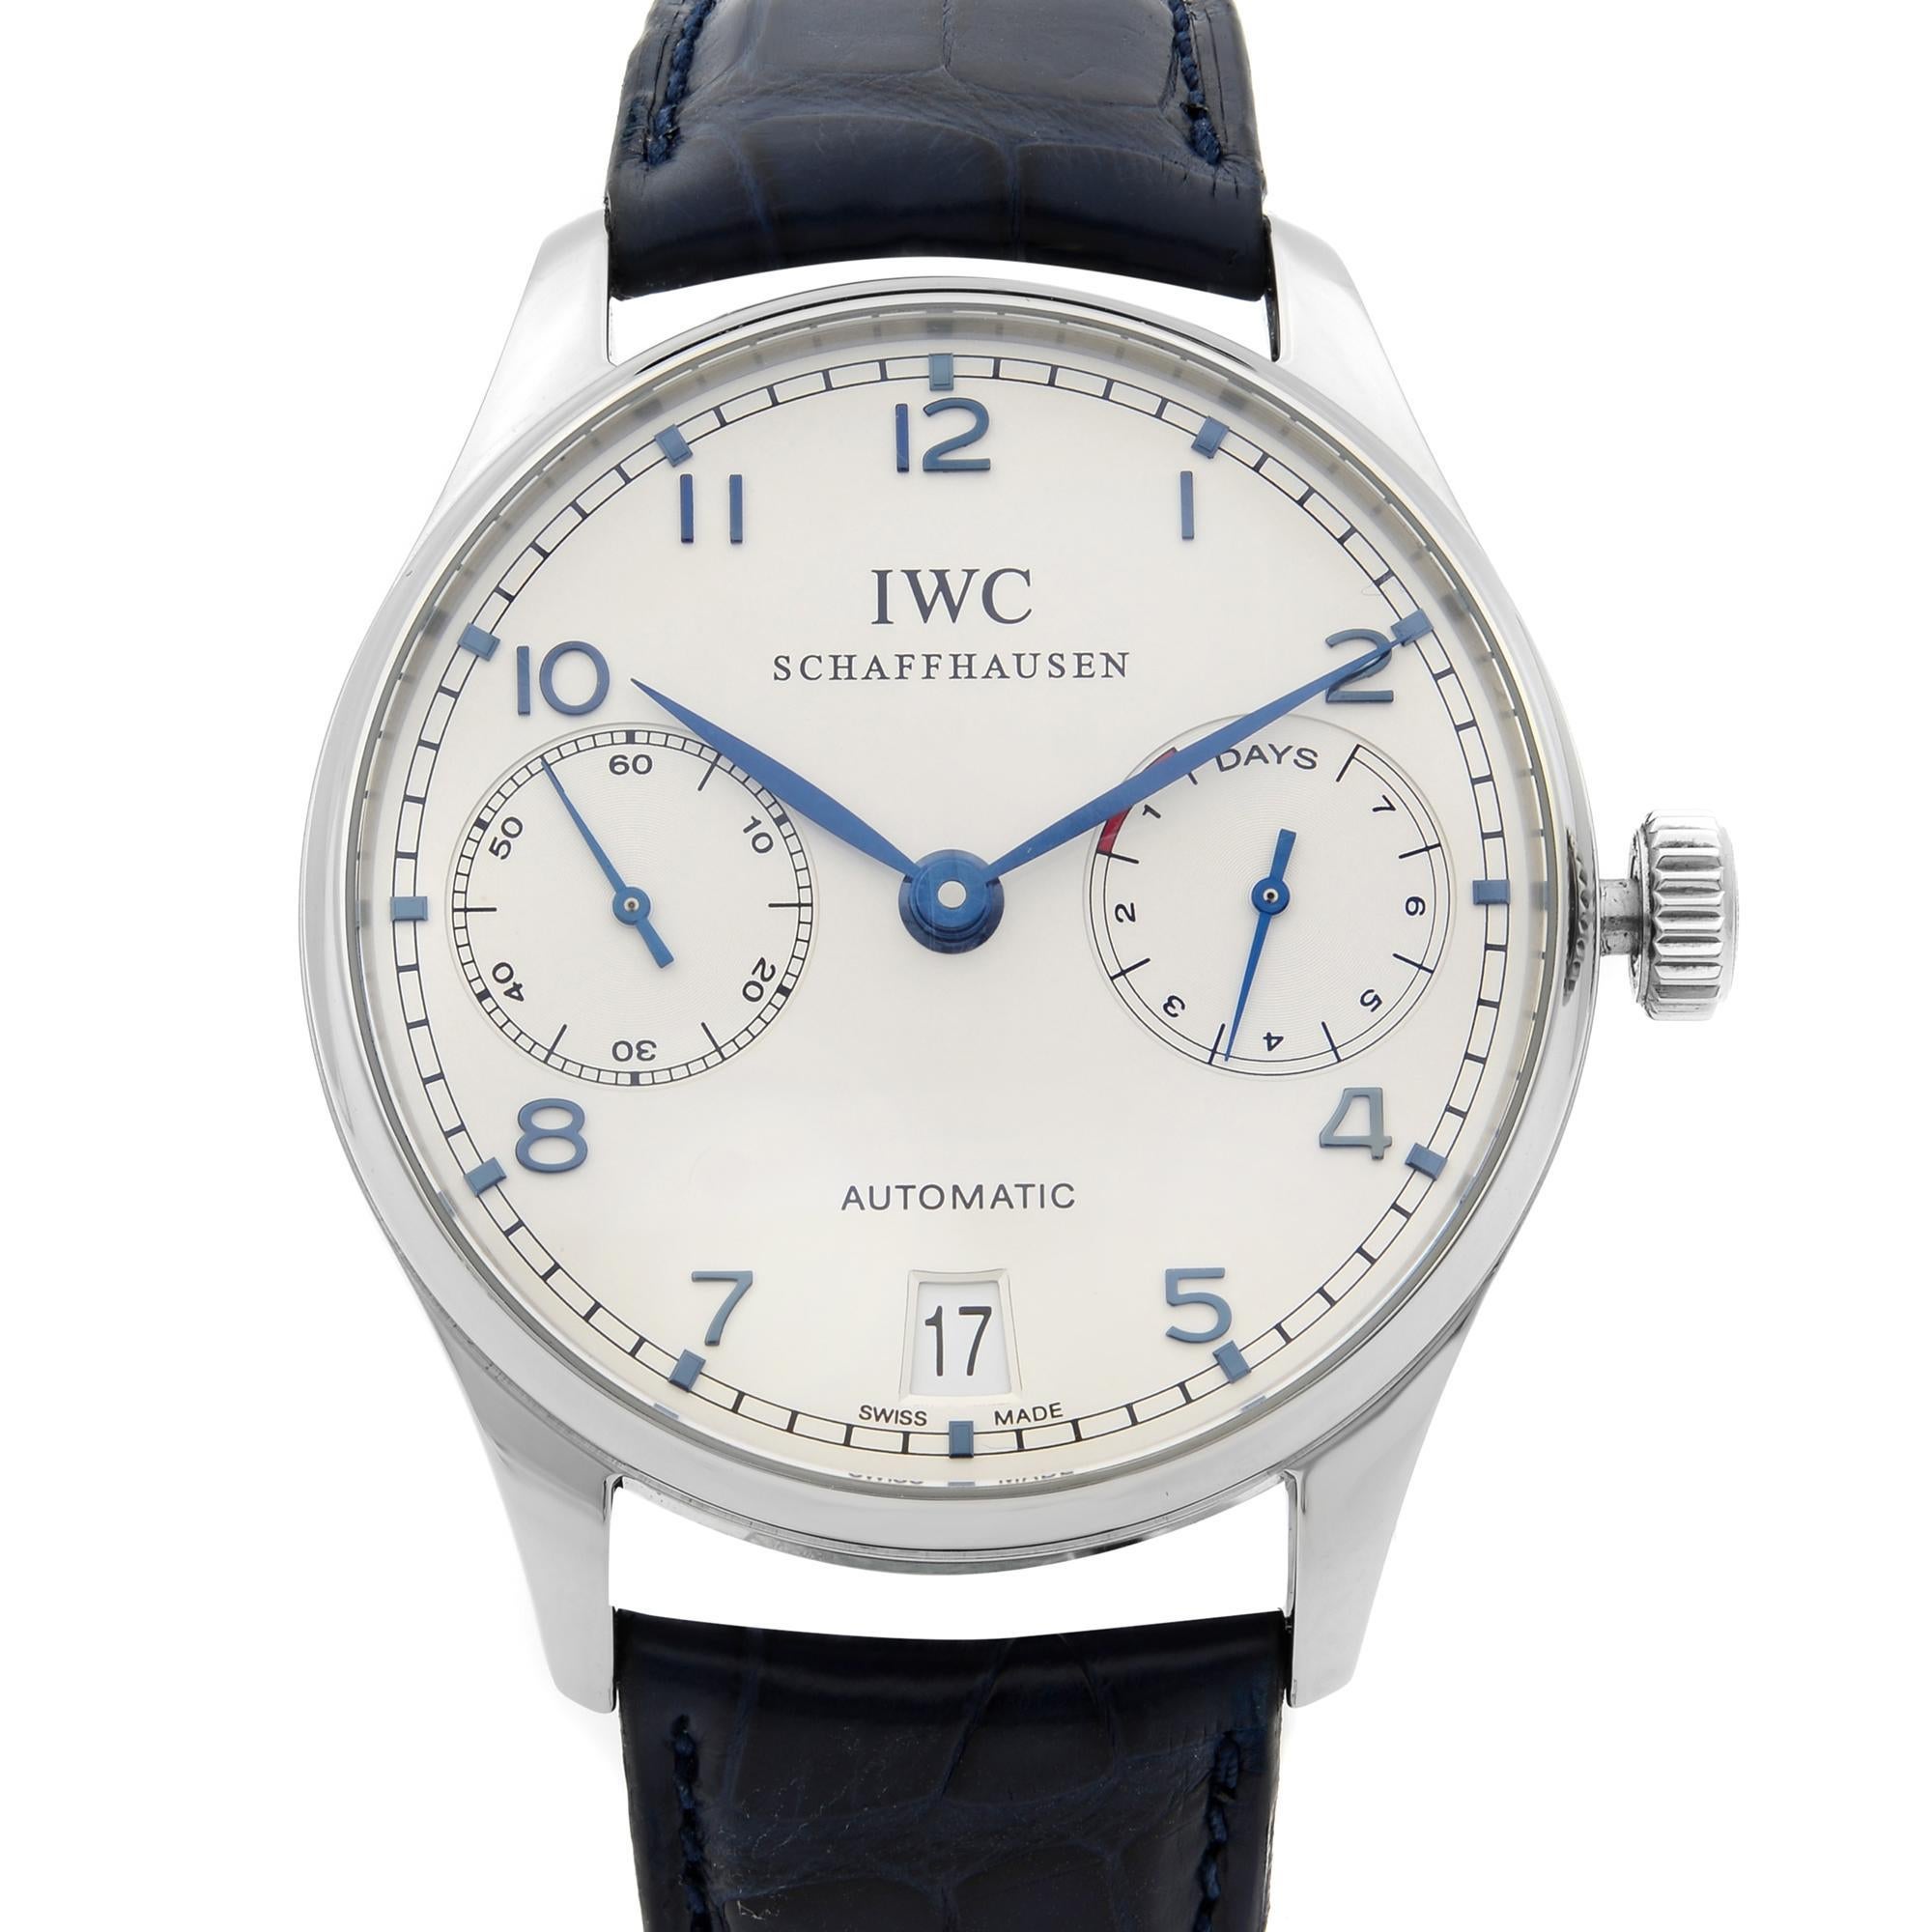 Pre-Owned IWC Portuguieser 7 Days 42mm Stainless Steel Silver Dial Automatic Men's Watch IW500107. Minor Wear on the Leather Strap Under Closer Inspection. This Beautiful Timepiece is Powered by a Mechanical (Automatic) Movement and Features: